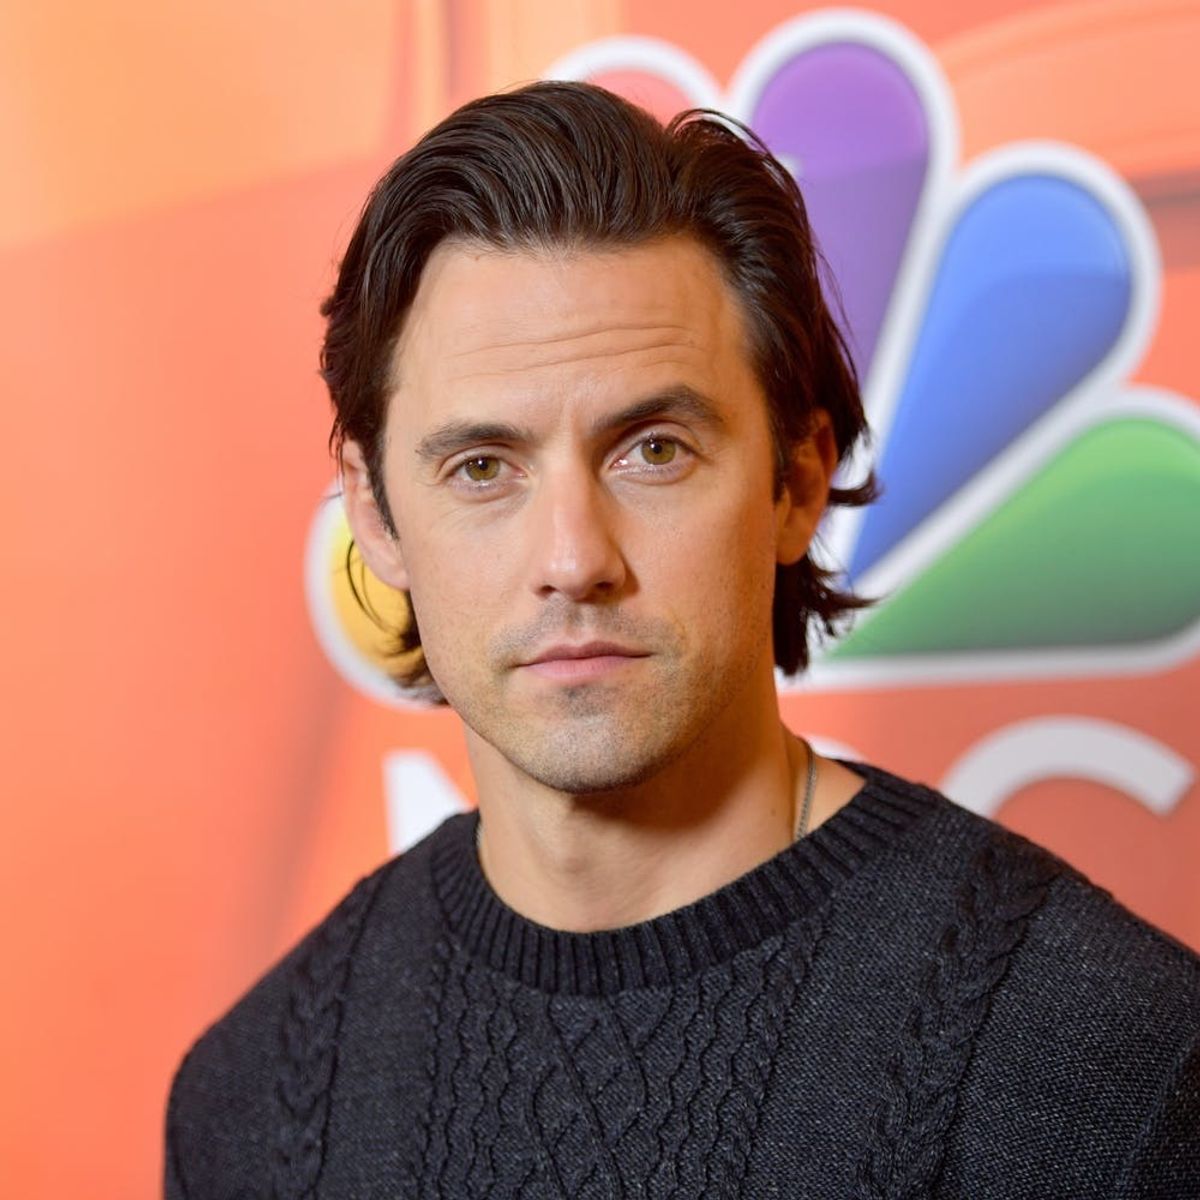 Milo Ventimiglia’s Dad Was More Excited About This Snack Than His Emmy Nomination